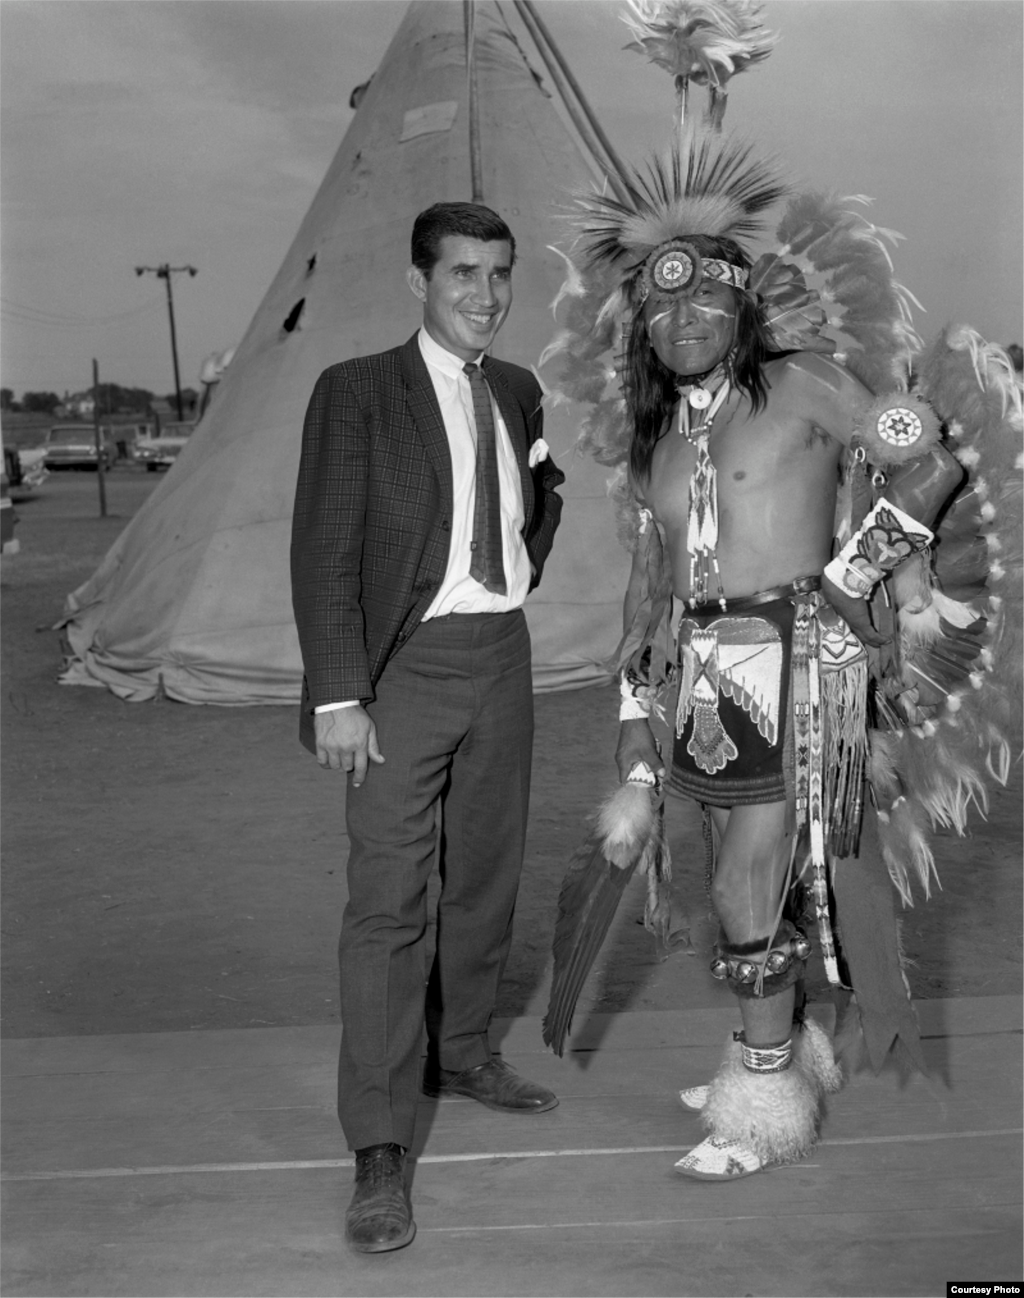 Danny Williams, left, and George “Woogie” Watchtaker (Comanche) at the American Indian Exposition. Anadarko, Oklahoma, ca. 1959. 45EXP17. © 2014 Estate of Horace Poolaw. Reprinted with permission.